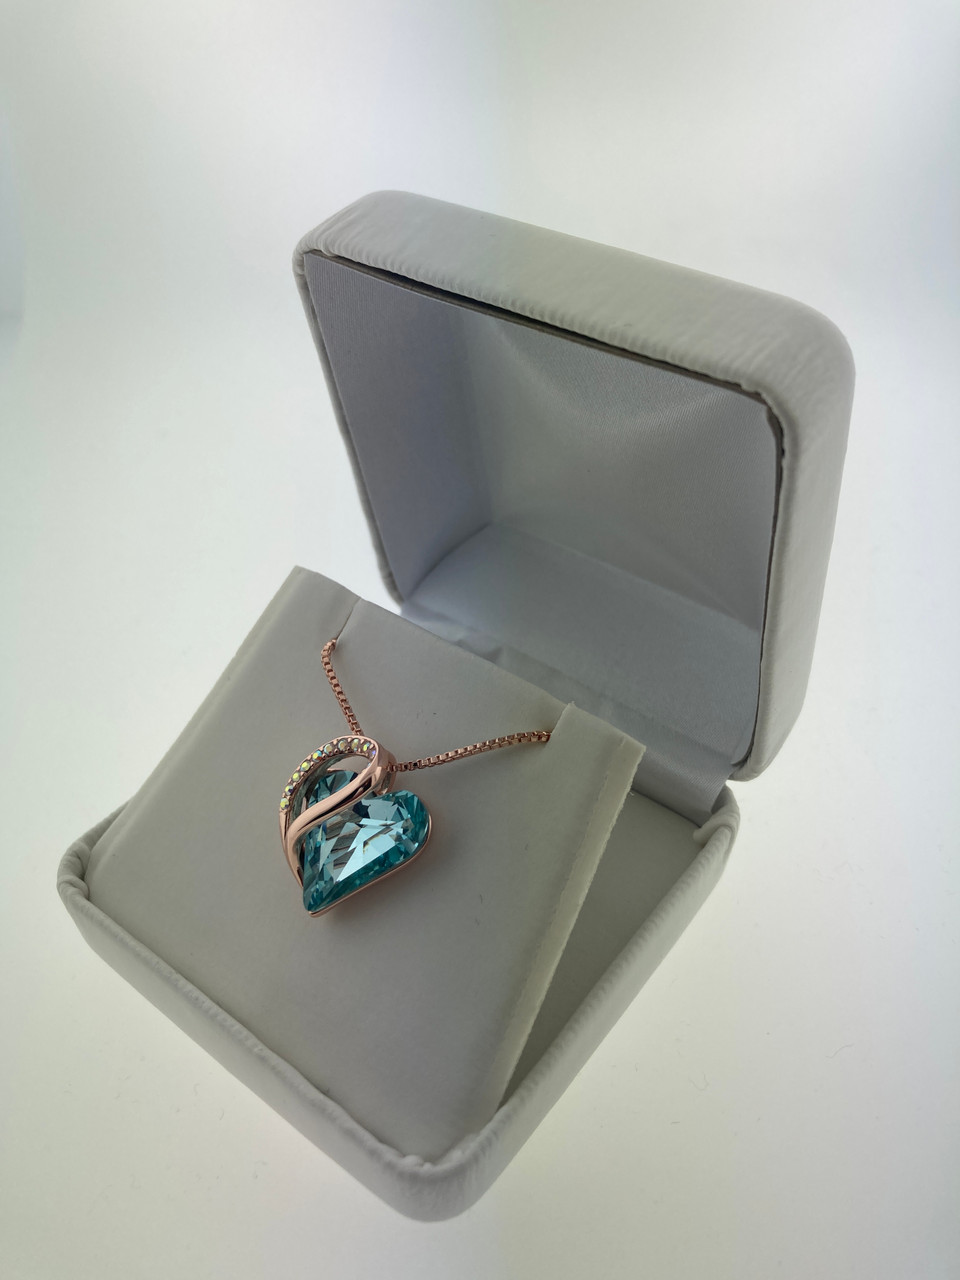 March Birthstone -  Turquoise / Aqua Blue  Looped Heart Design Crystal Rose Gold Pendant and CZ stones - with 18" Chain Necklace. Gift for Lover, Girl Friend, Wife, Valentine's Day Gift, Mother's Day, Anniversary Gift Heart Necklace.